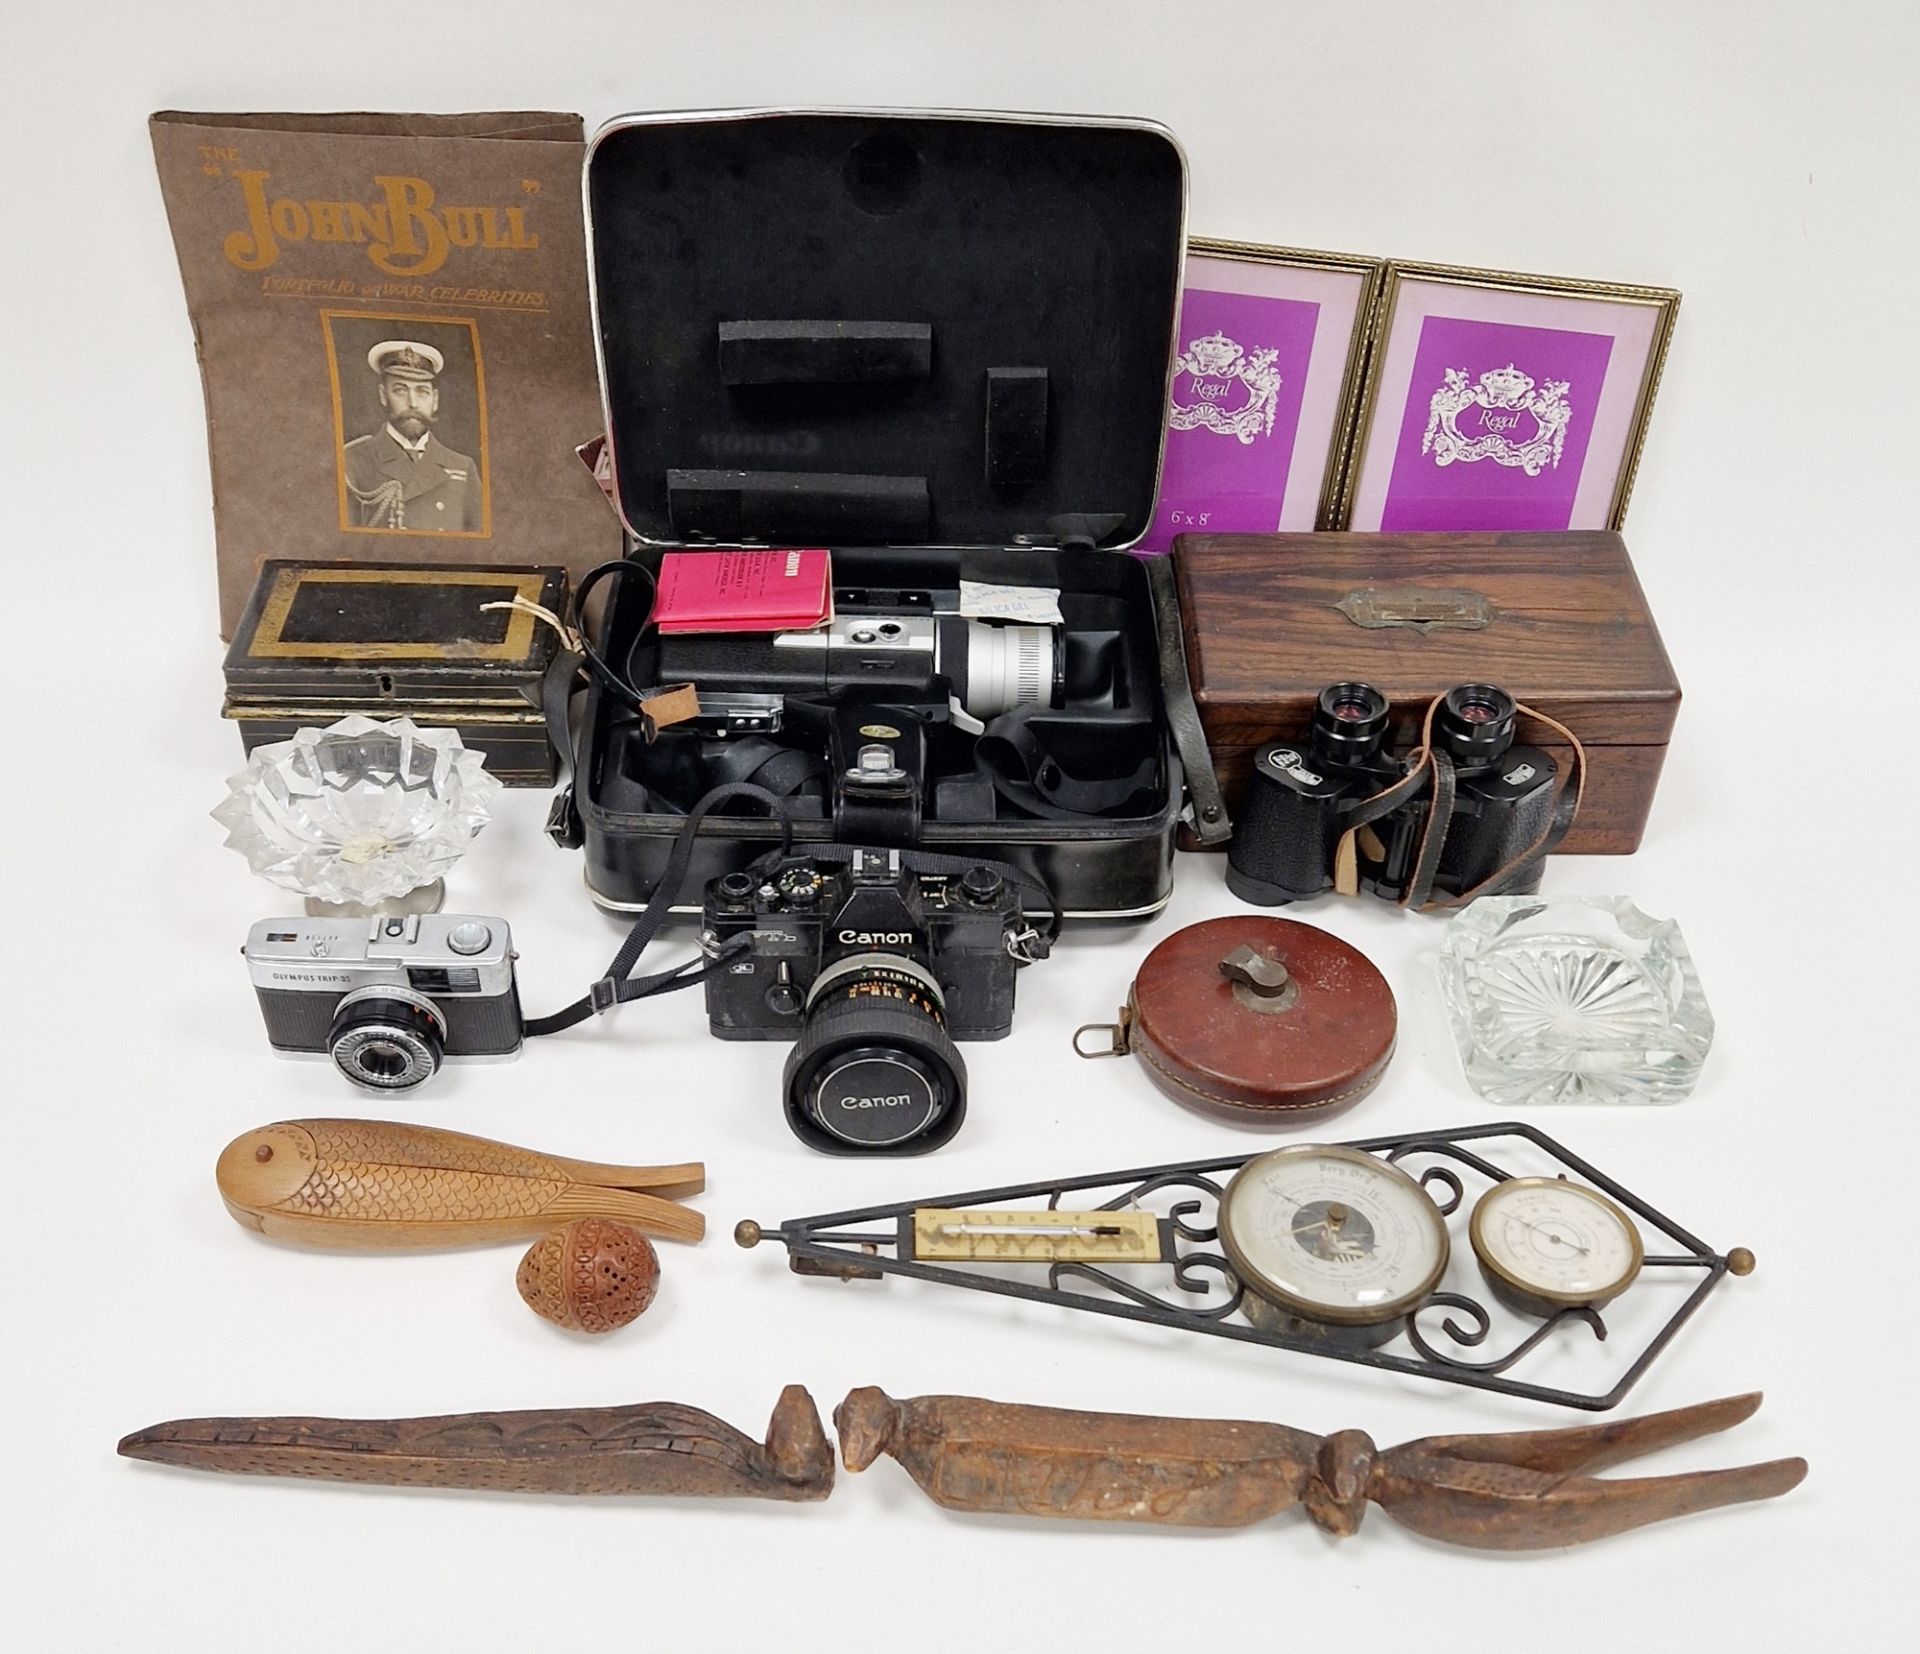 Very distressed Canon camera, a vintage leather tape measure, a pair of Zeiss binoculars in carry